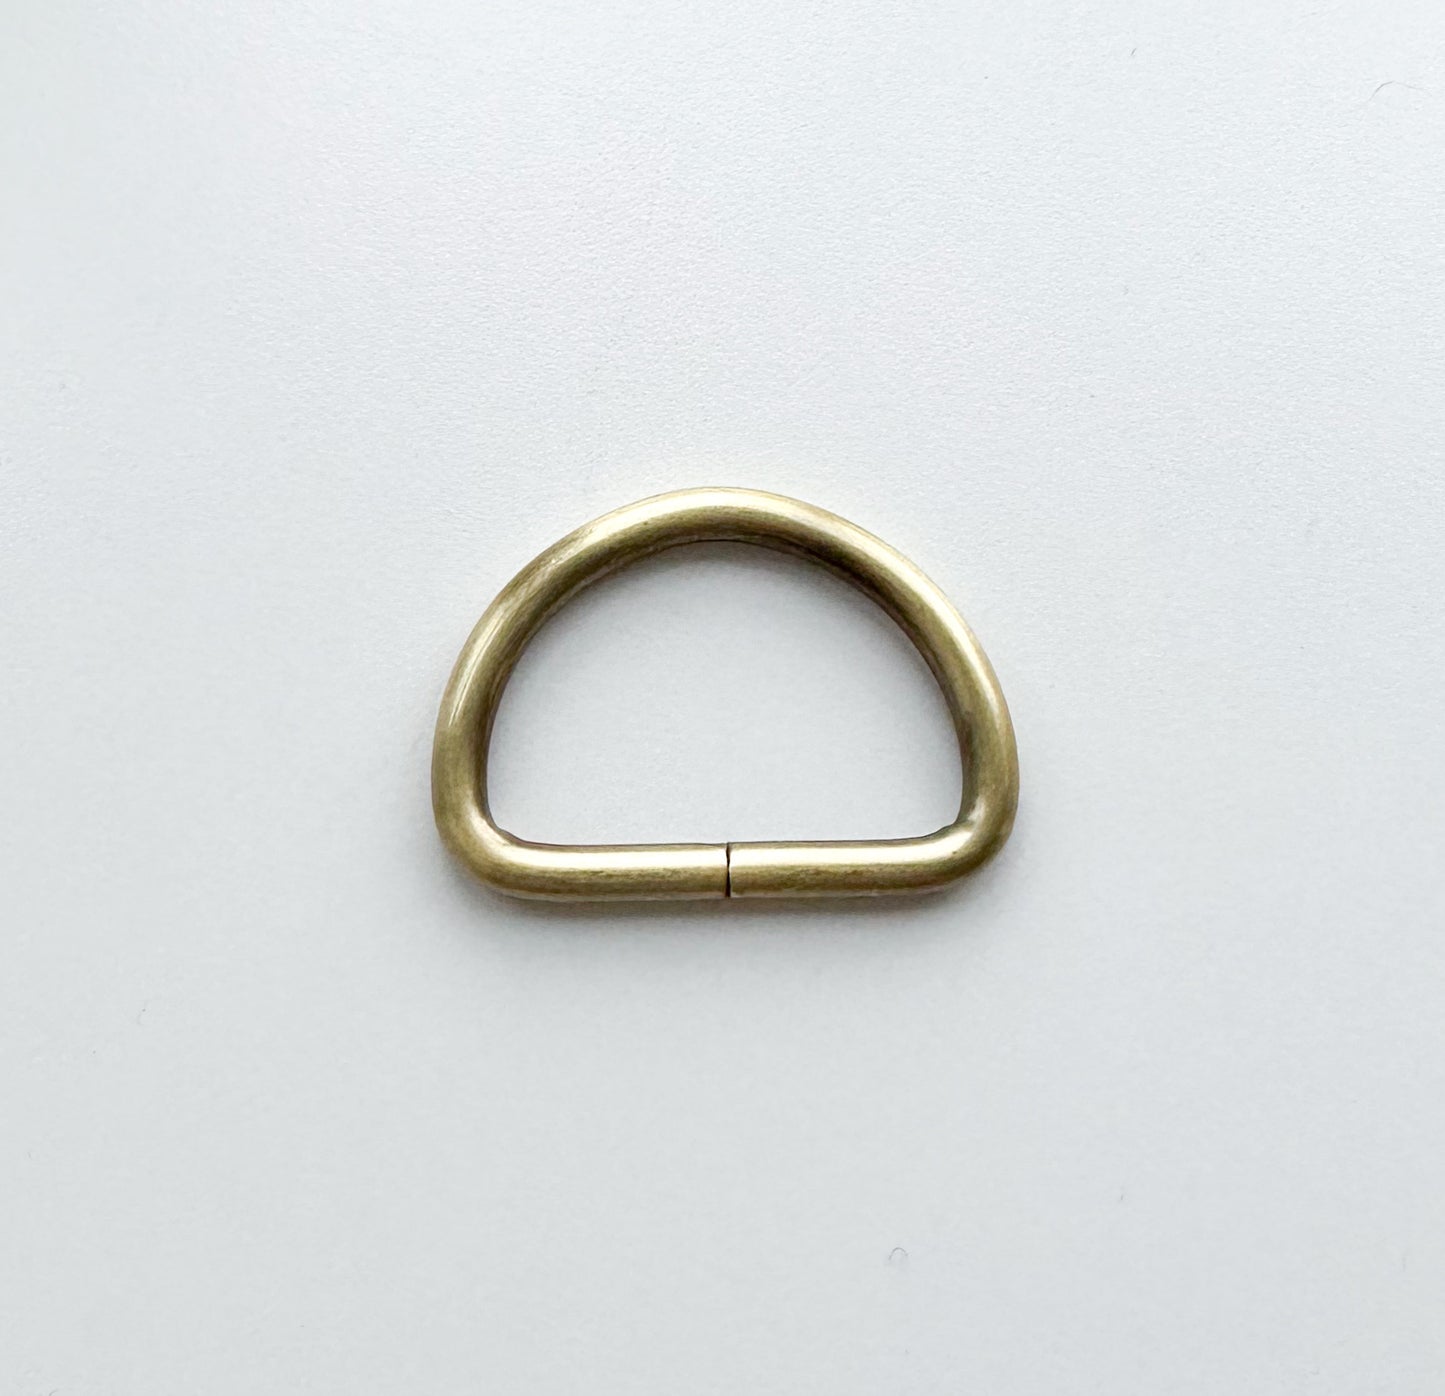 D-ring size: 1.5” (38mm)